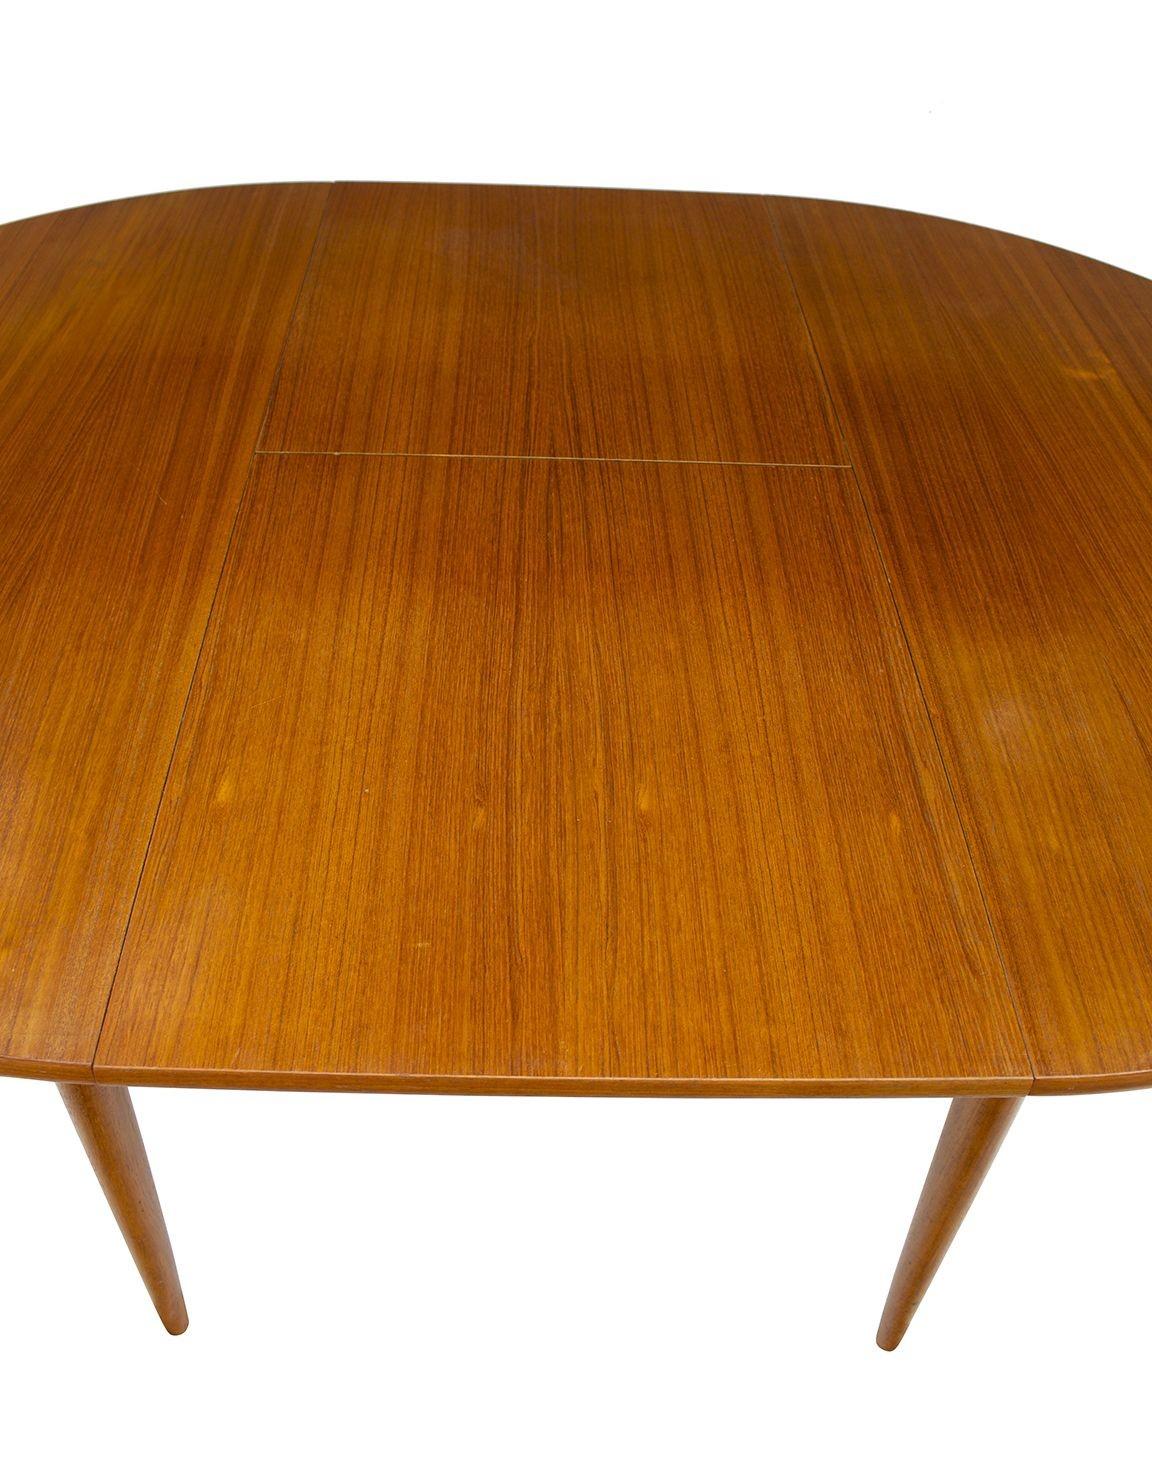 Round Scandinavian Teak Dining Table with Butterfly Leaf 5